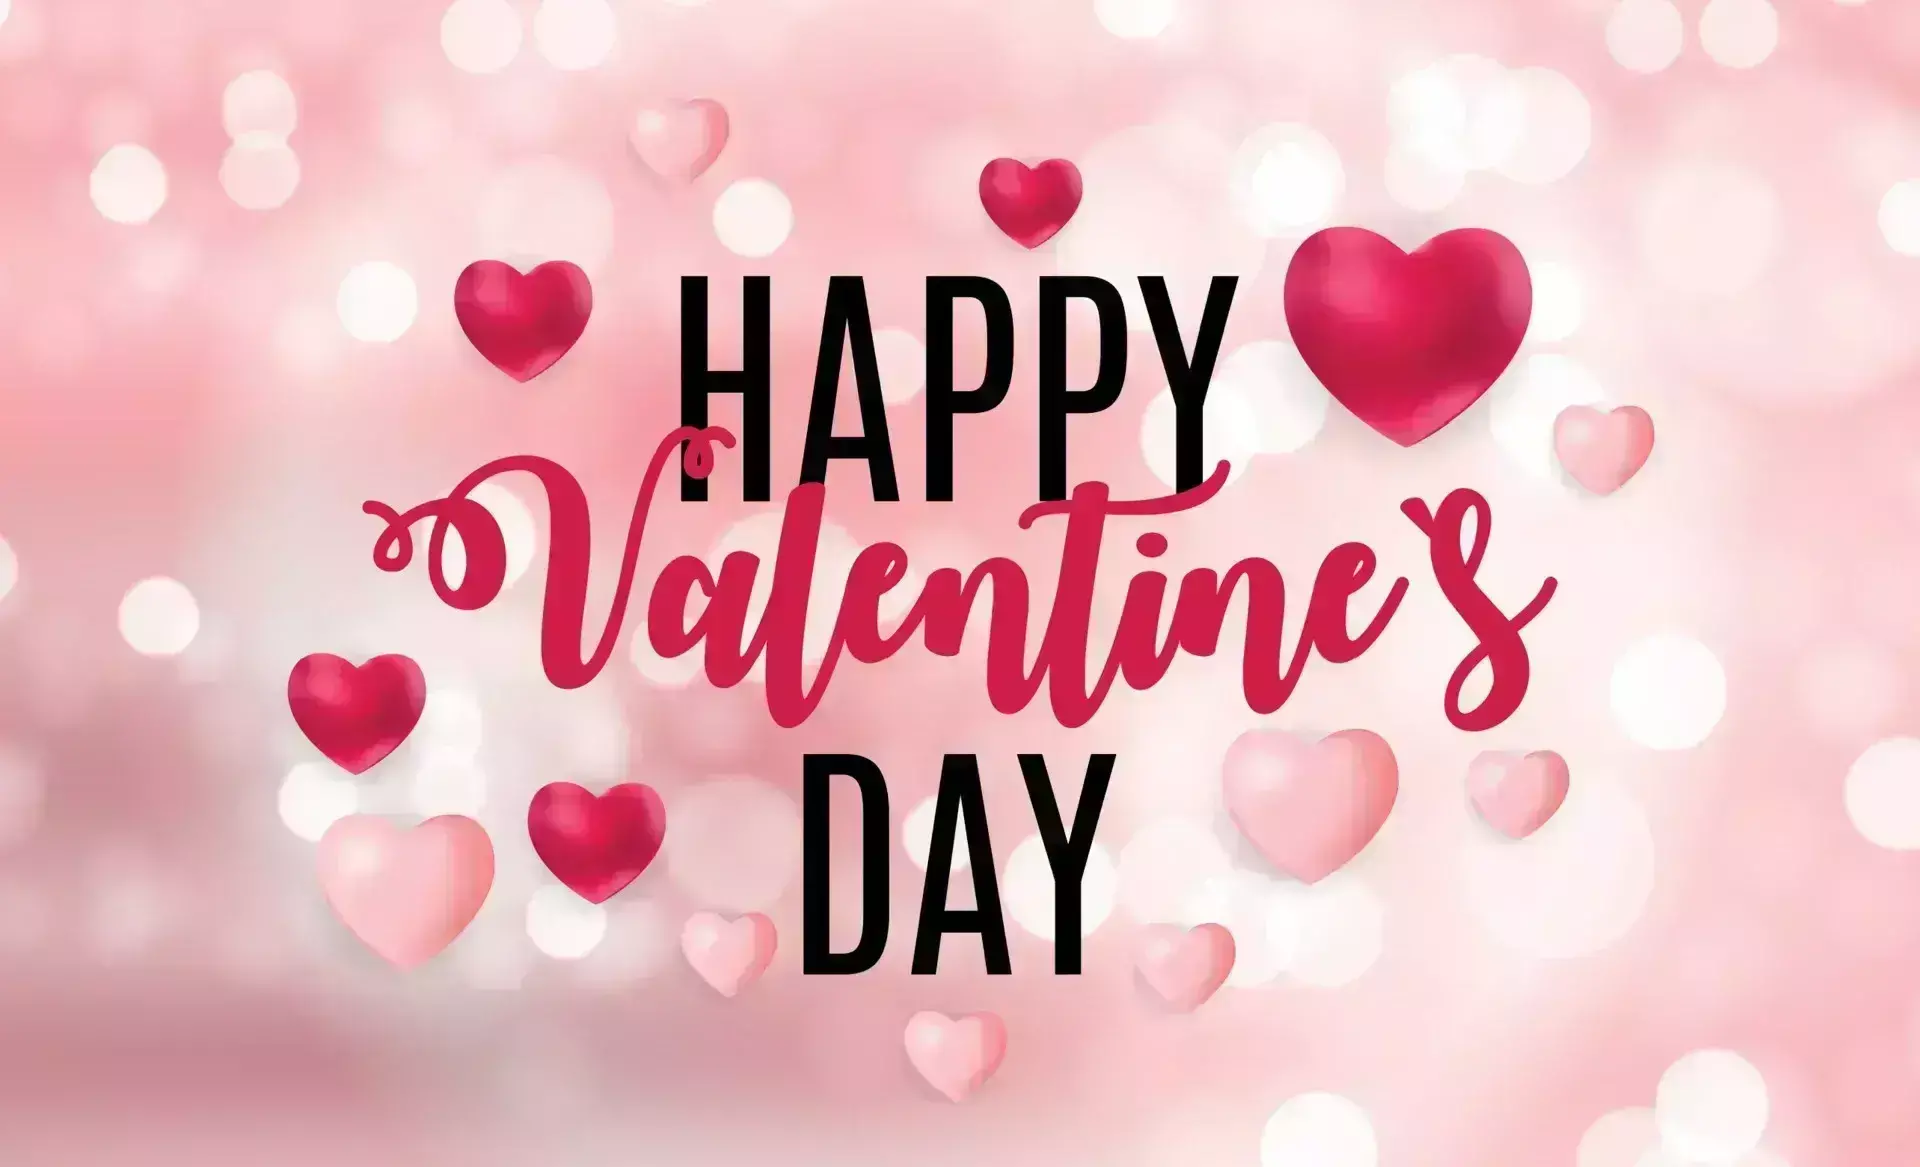 https://assets.thehansindia.com/h-upload/2023/02/14/1335903-happy-valentines-day-card-with-heart-illustration-free-vector.webp